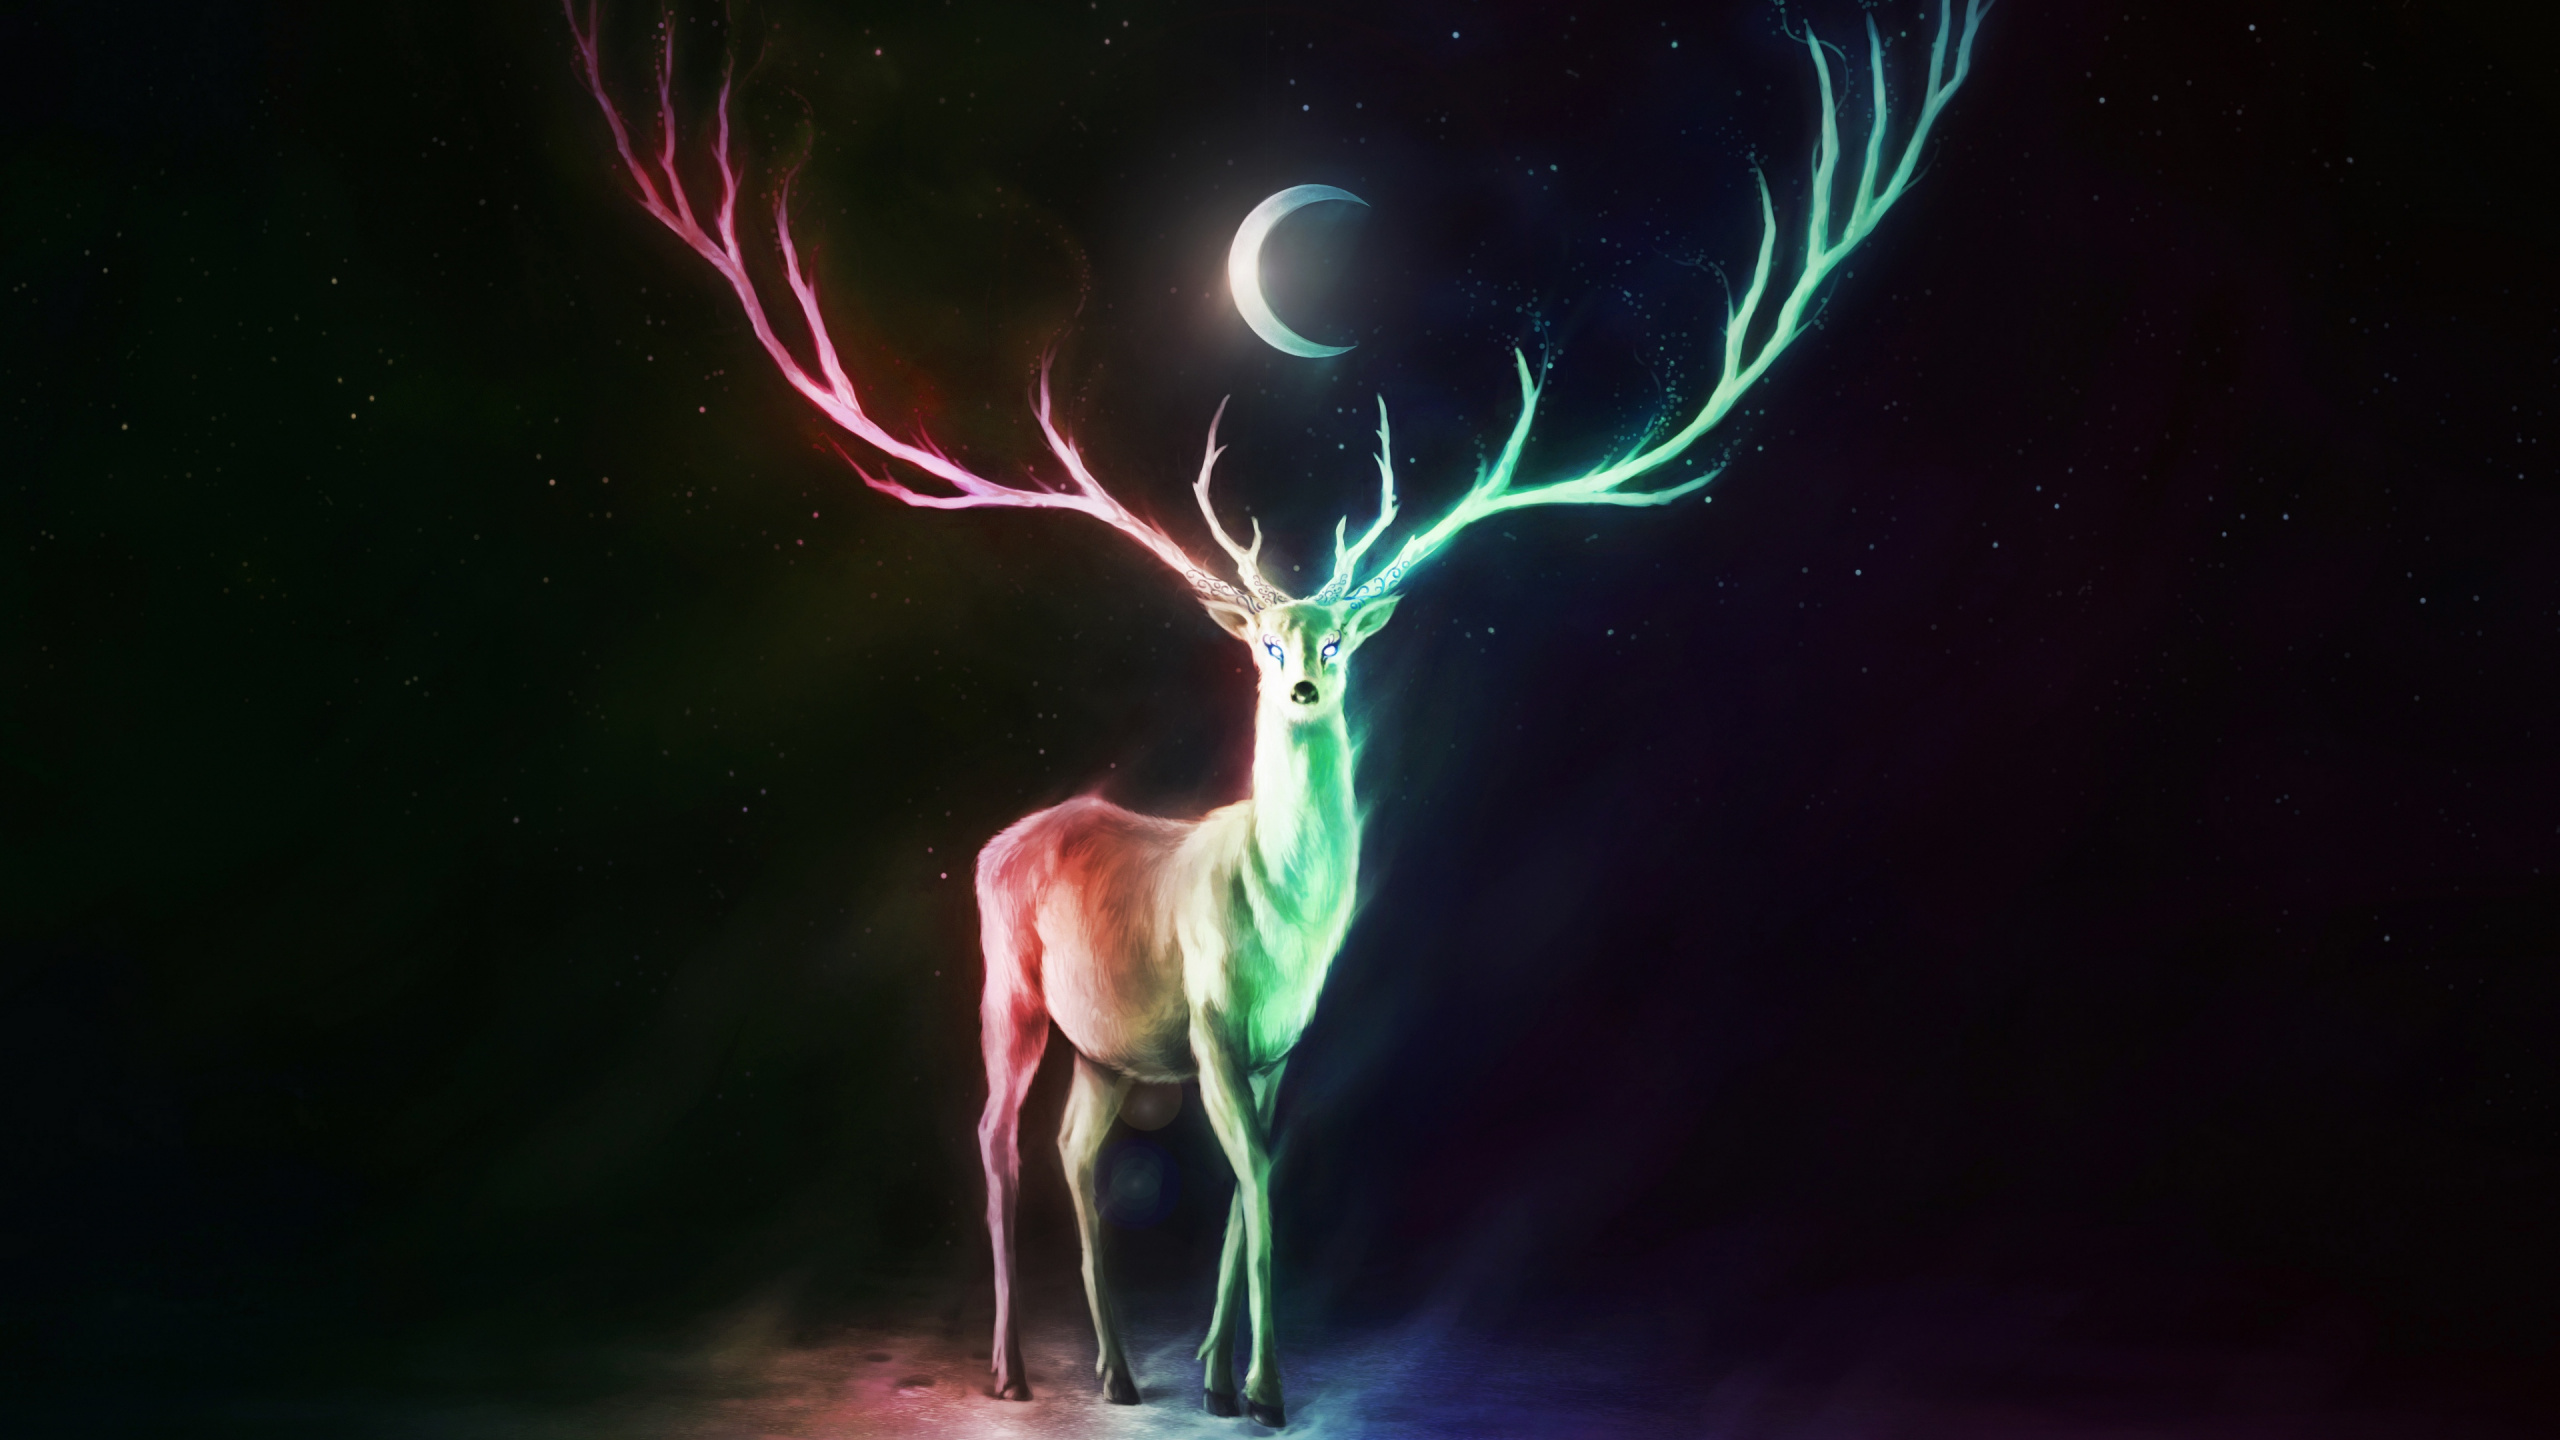 Purple and White Deer Illustration. Wallpaper in 2560x1440 Resolution